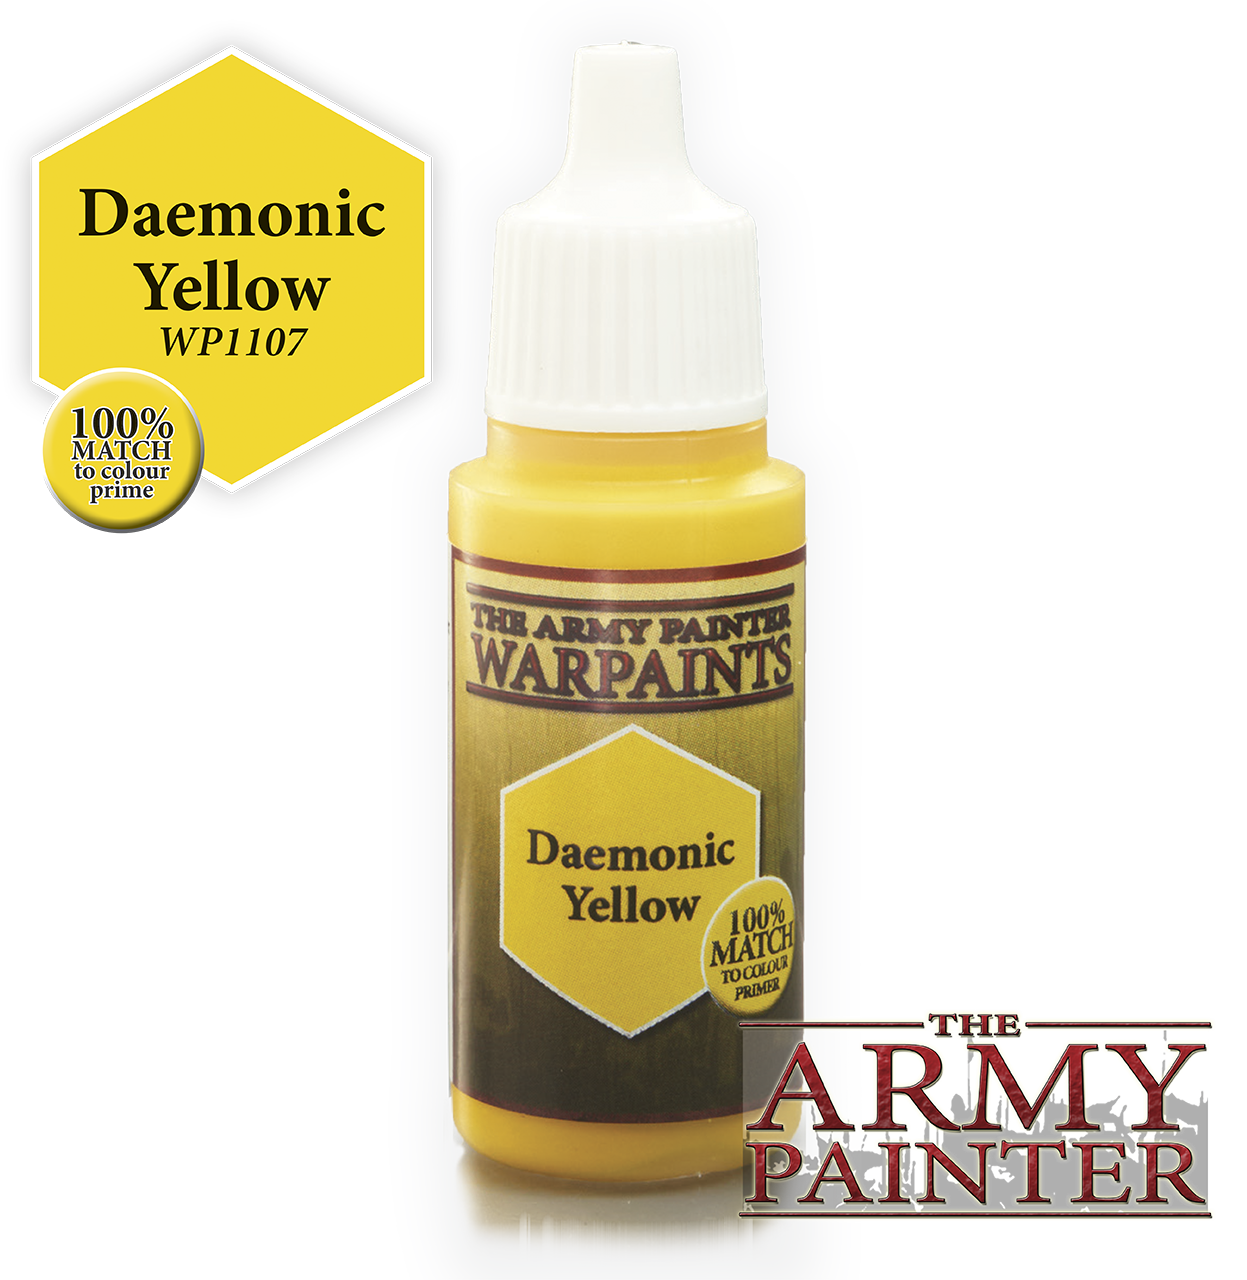 The ARMY PAINTER: Acrylics Warpaint - Daemonic Yellow | Tacoma Games